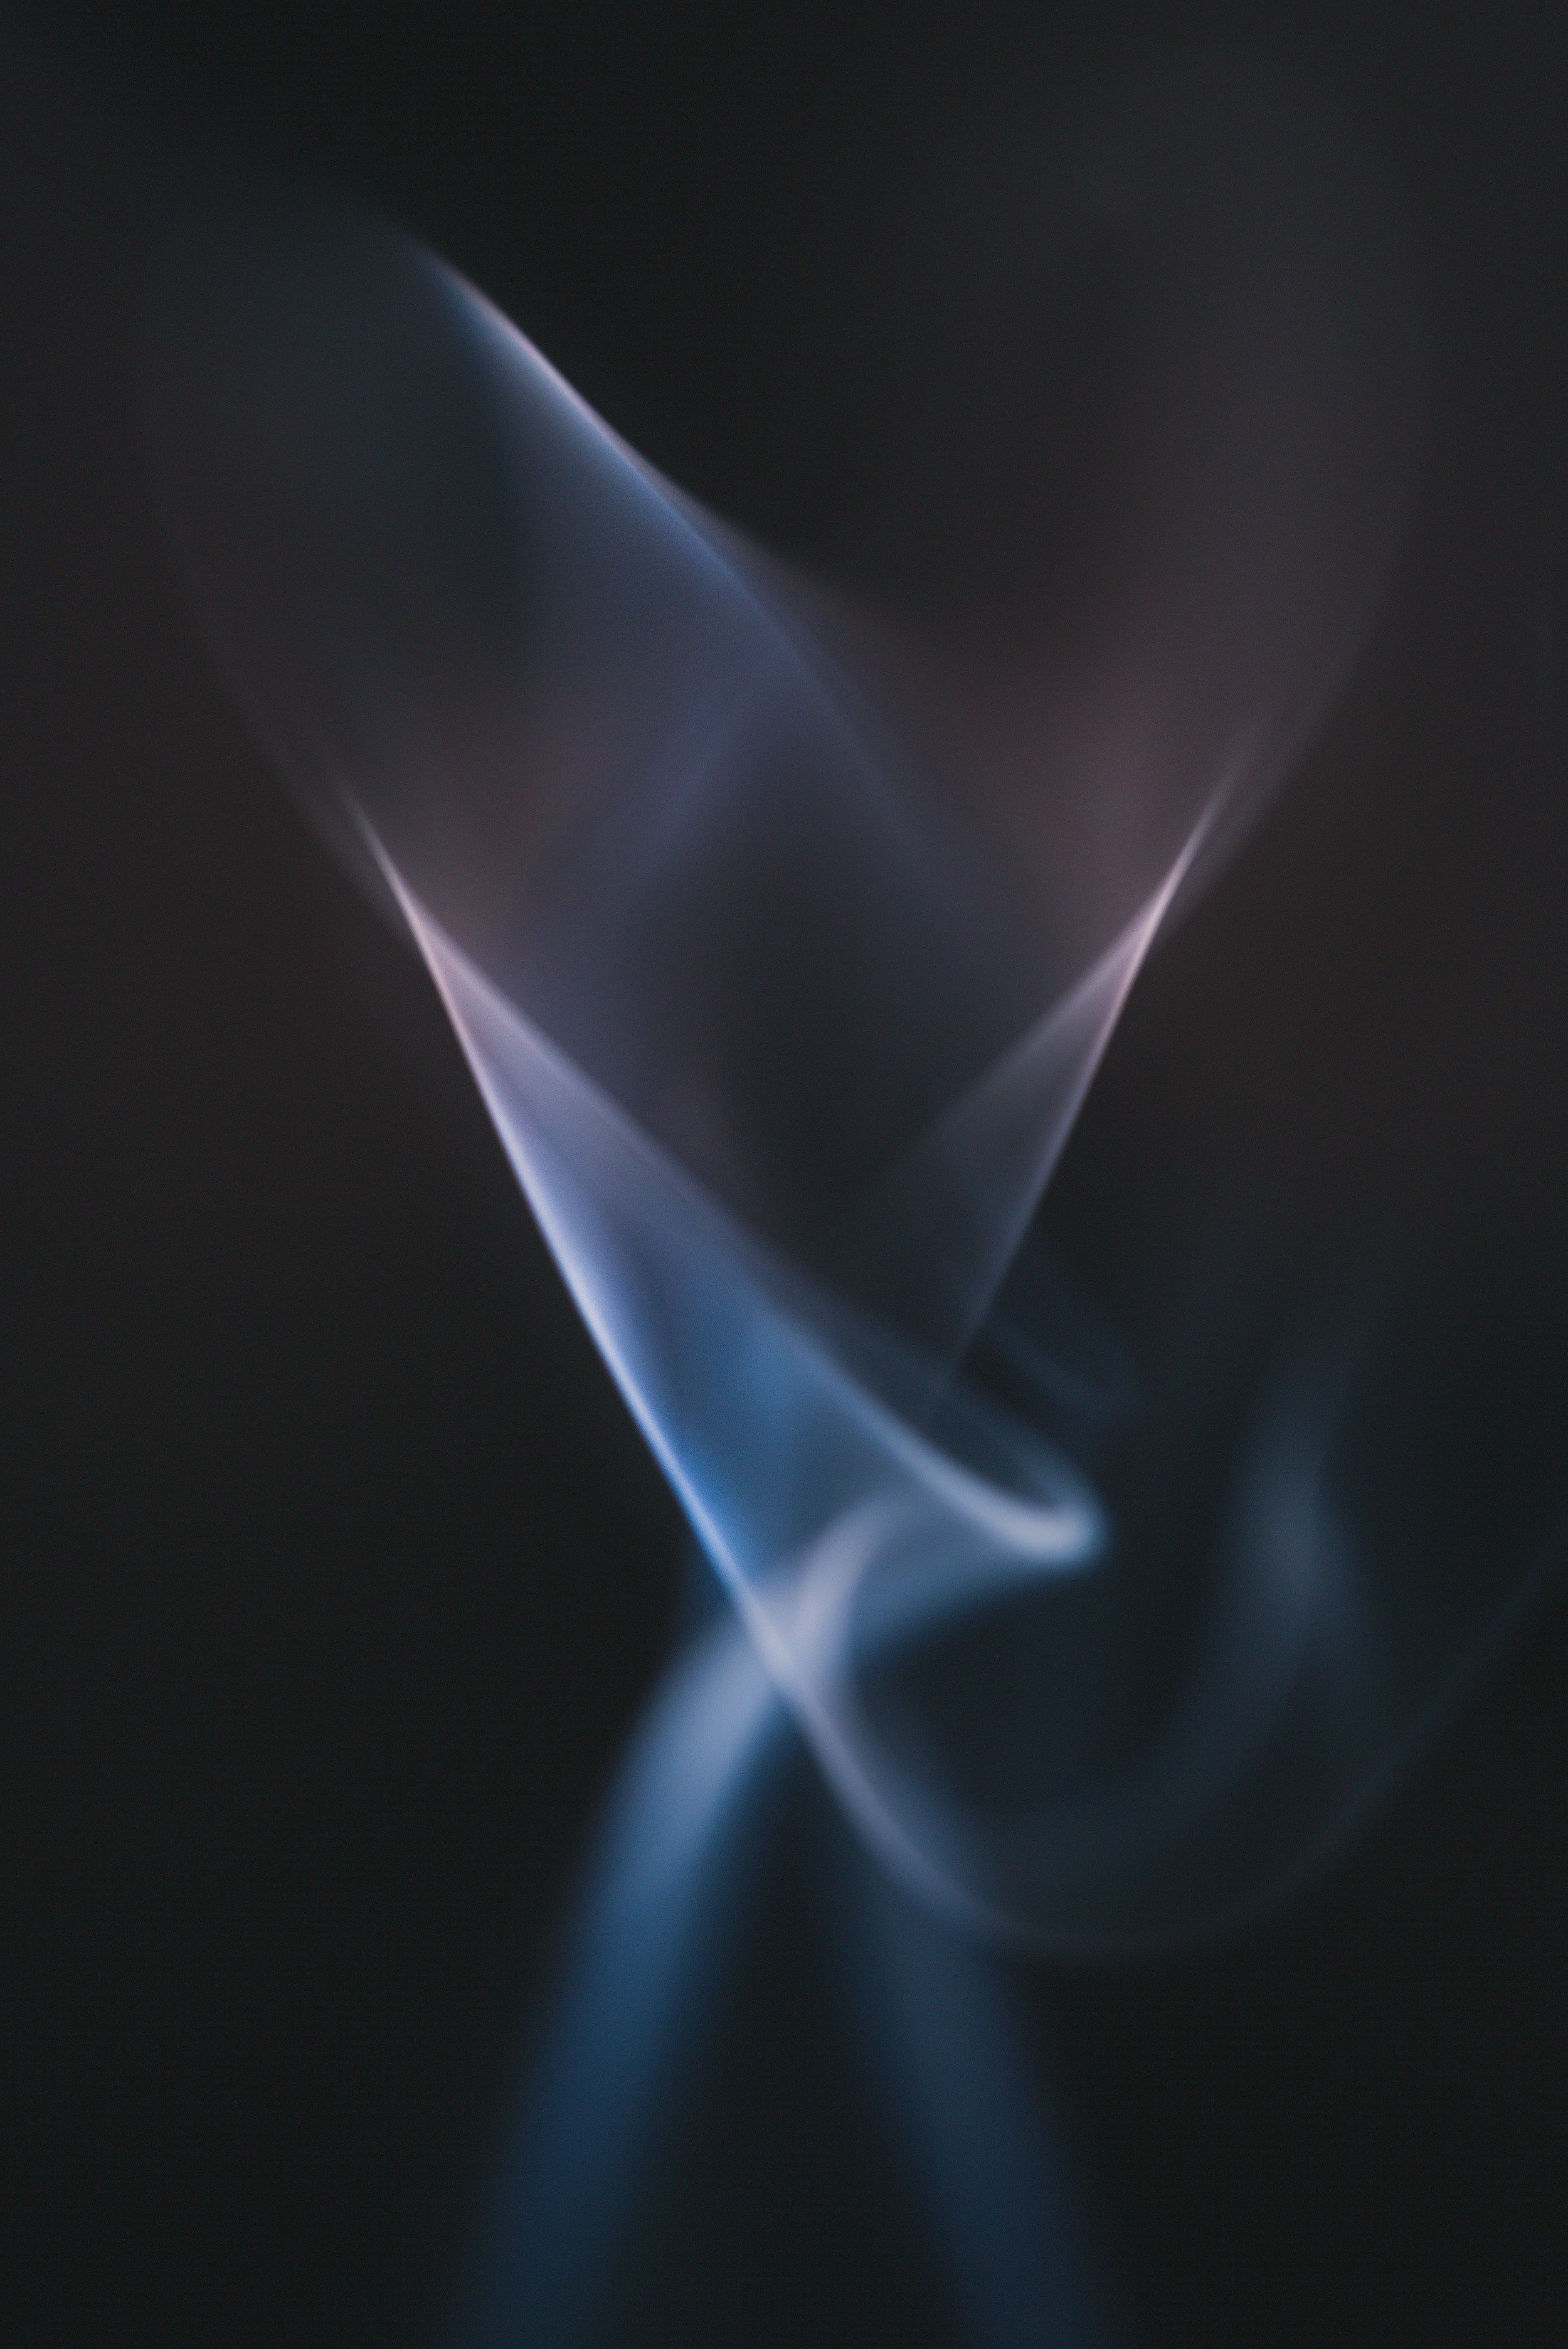 Since you all liked the first one, here's another abstract smoke